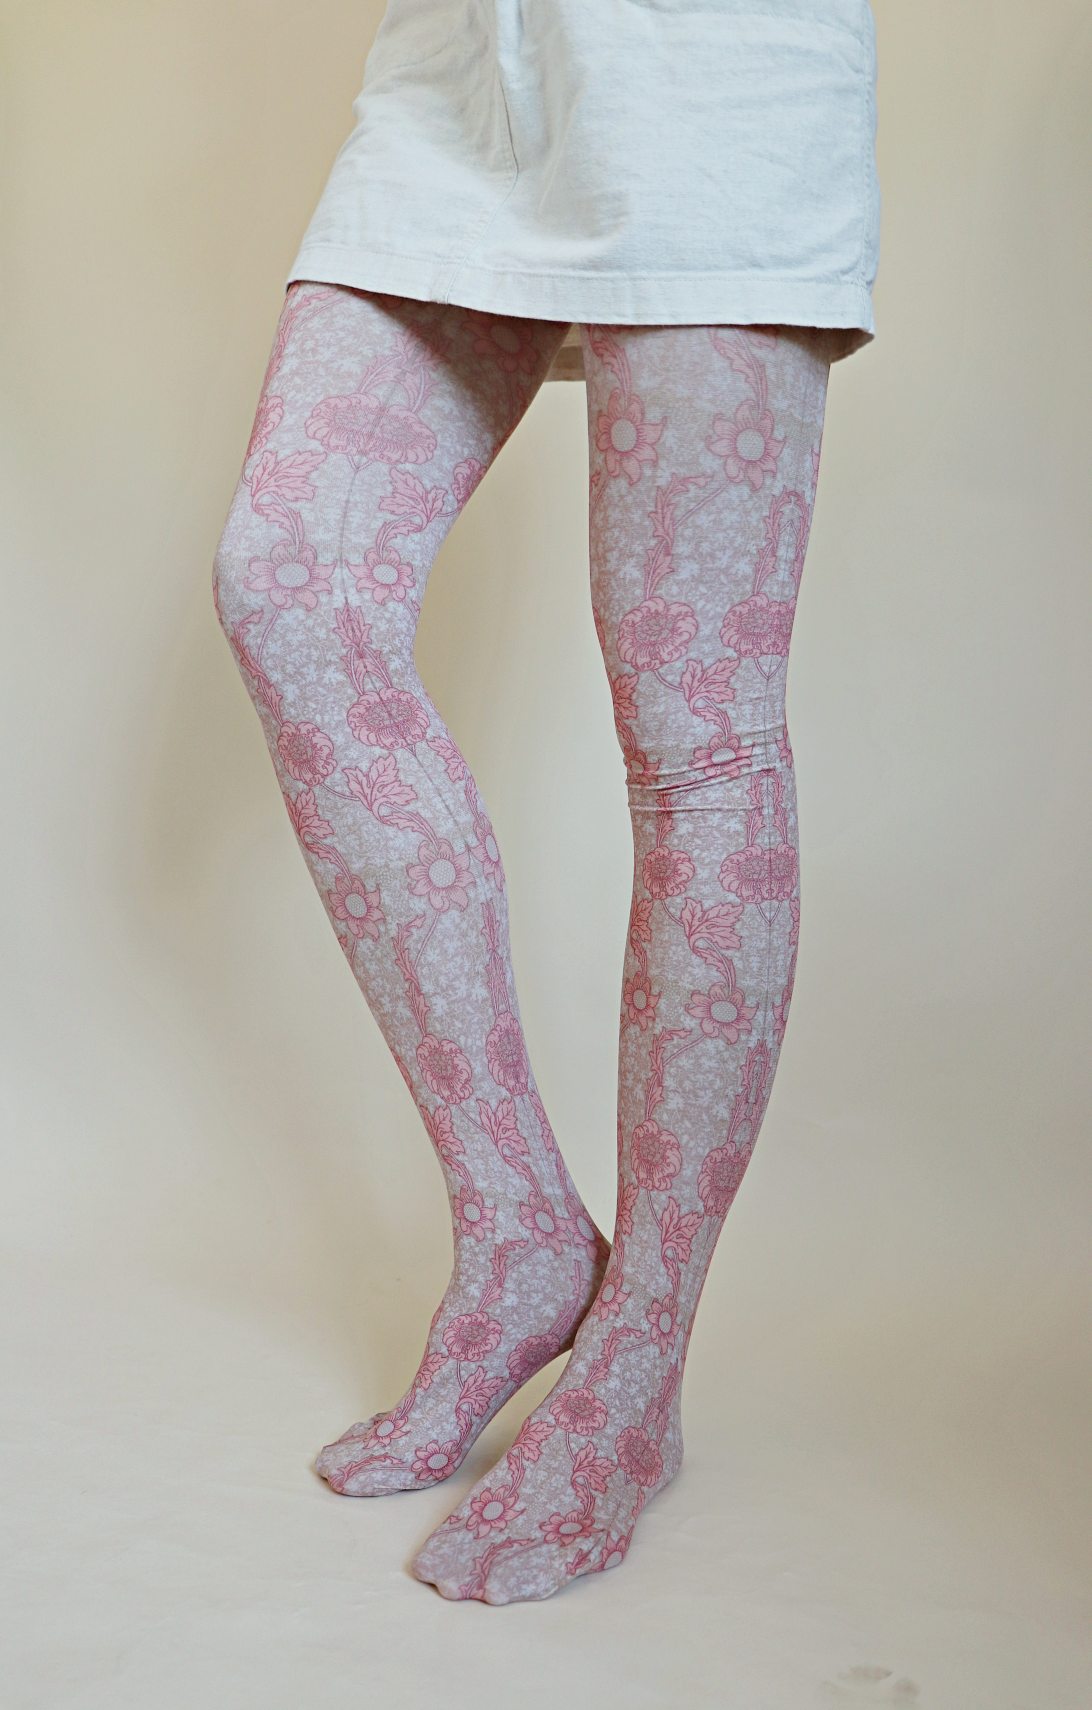 Tights called Kennet from the William Morris collection of the TABBISOCKS brand, with a pink floral design throughout, in an antique-like peach color